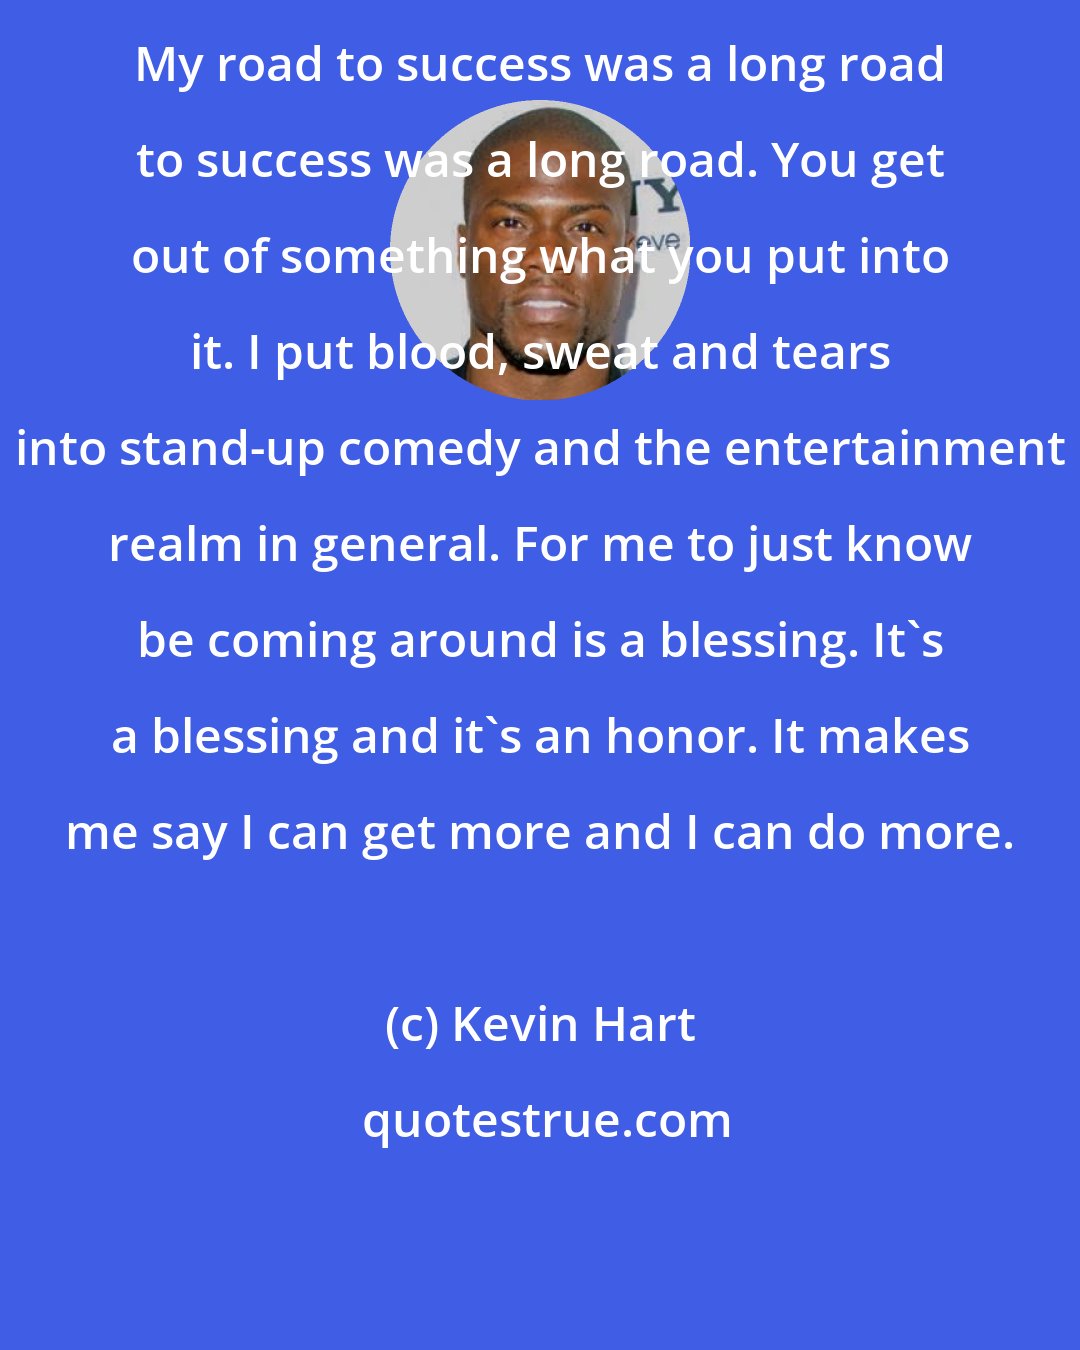 Kevin Hart: My road to success was a long road to success was a long road. You get out of something what you put into it. I put blood, sweat and tears into stand-up comedy and the entertainment realm in general. For me to just know be coming around is a blessing. It's a blessing and it's an honor. It makes me say I can get more and I can do more.